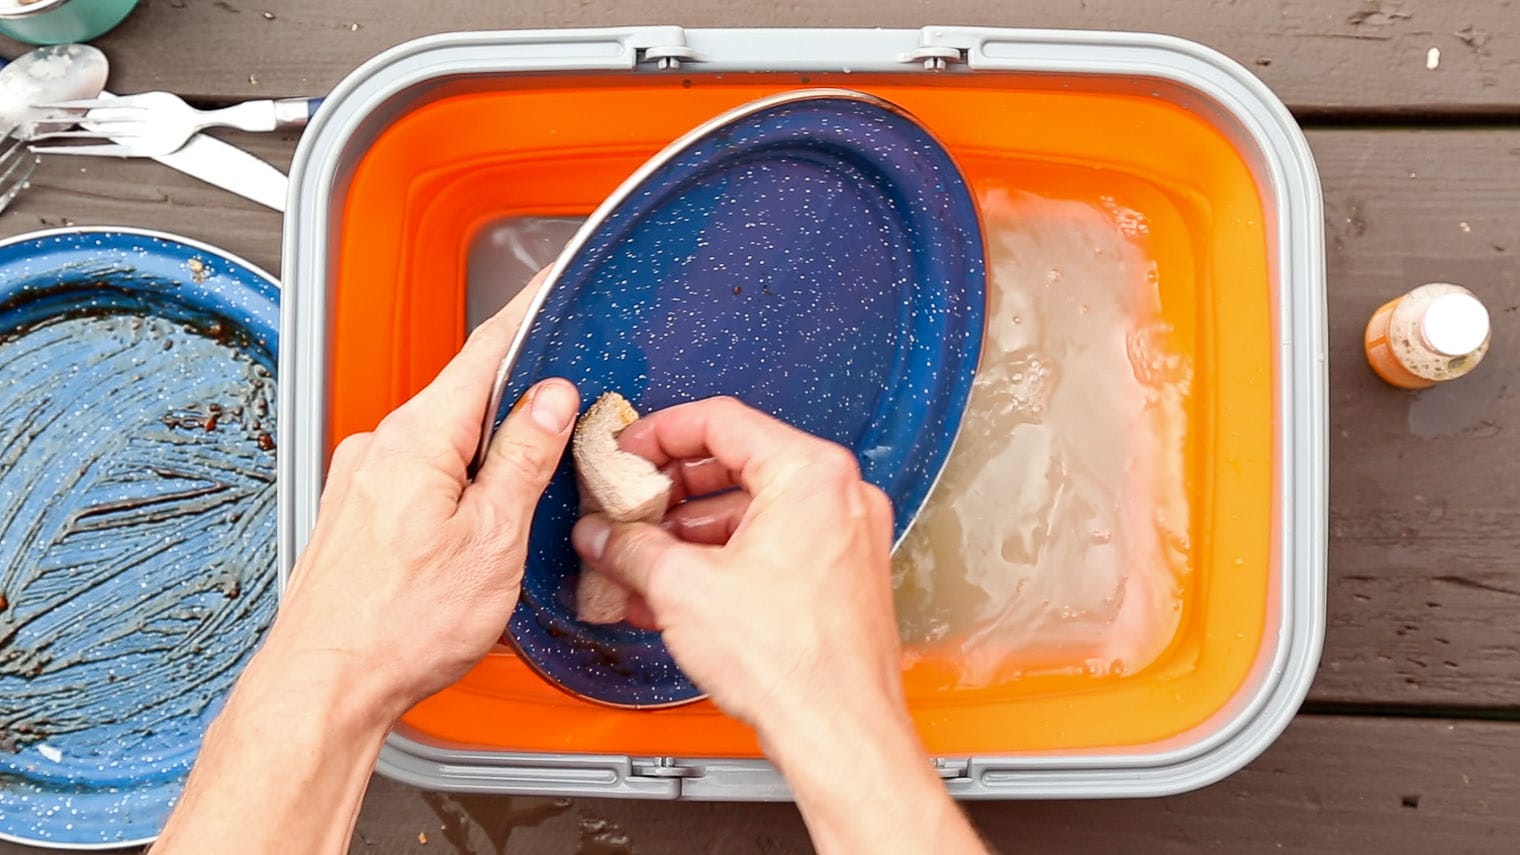 How to wash dishes while camping using the three bucket method.